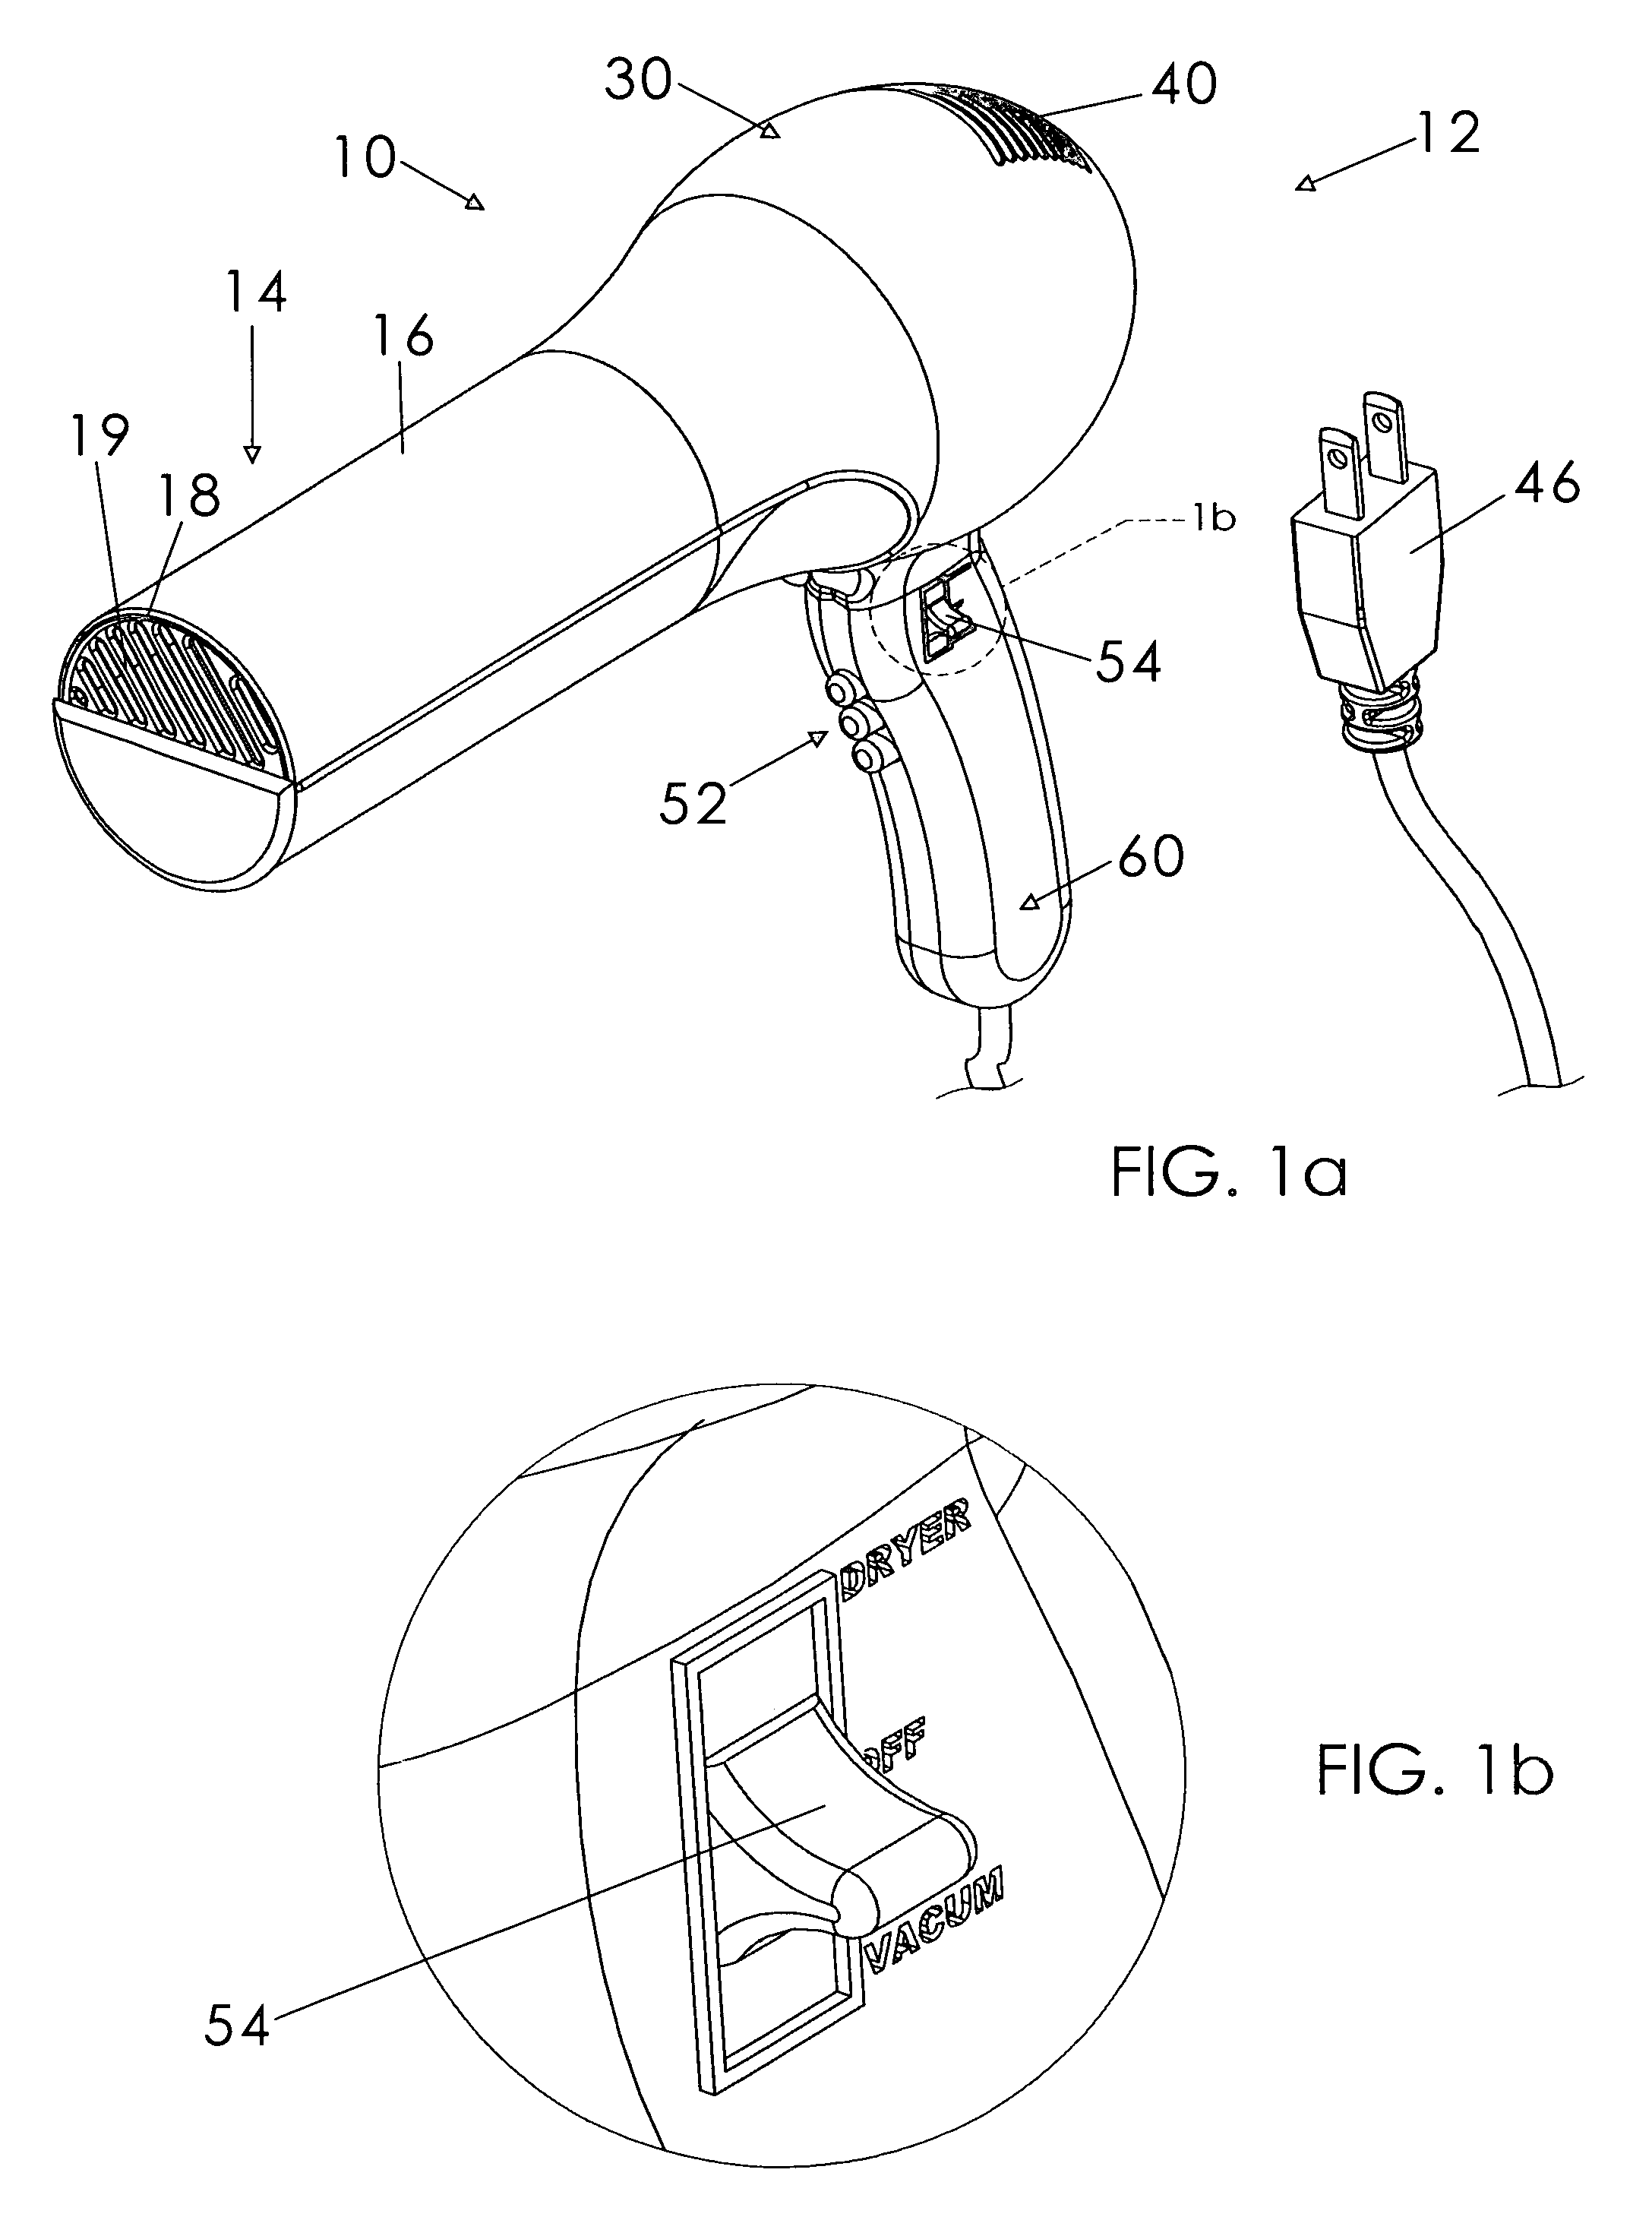 Hair dryer and vacuum device